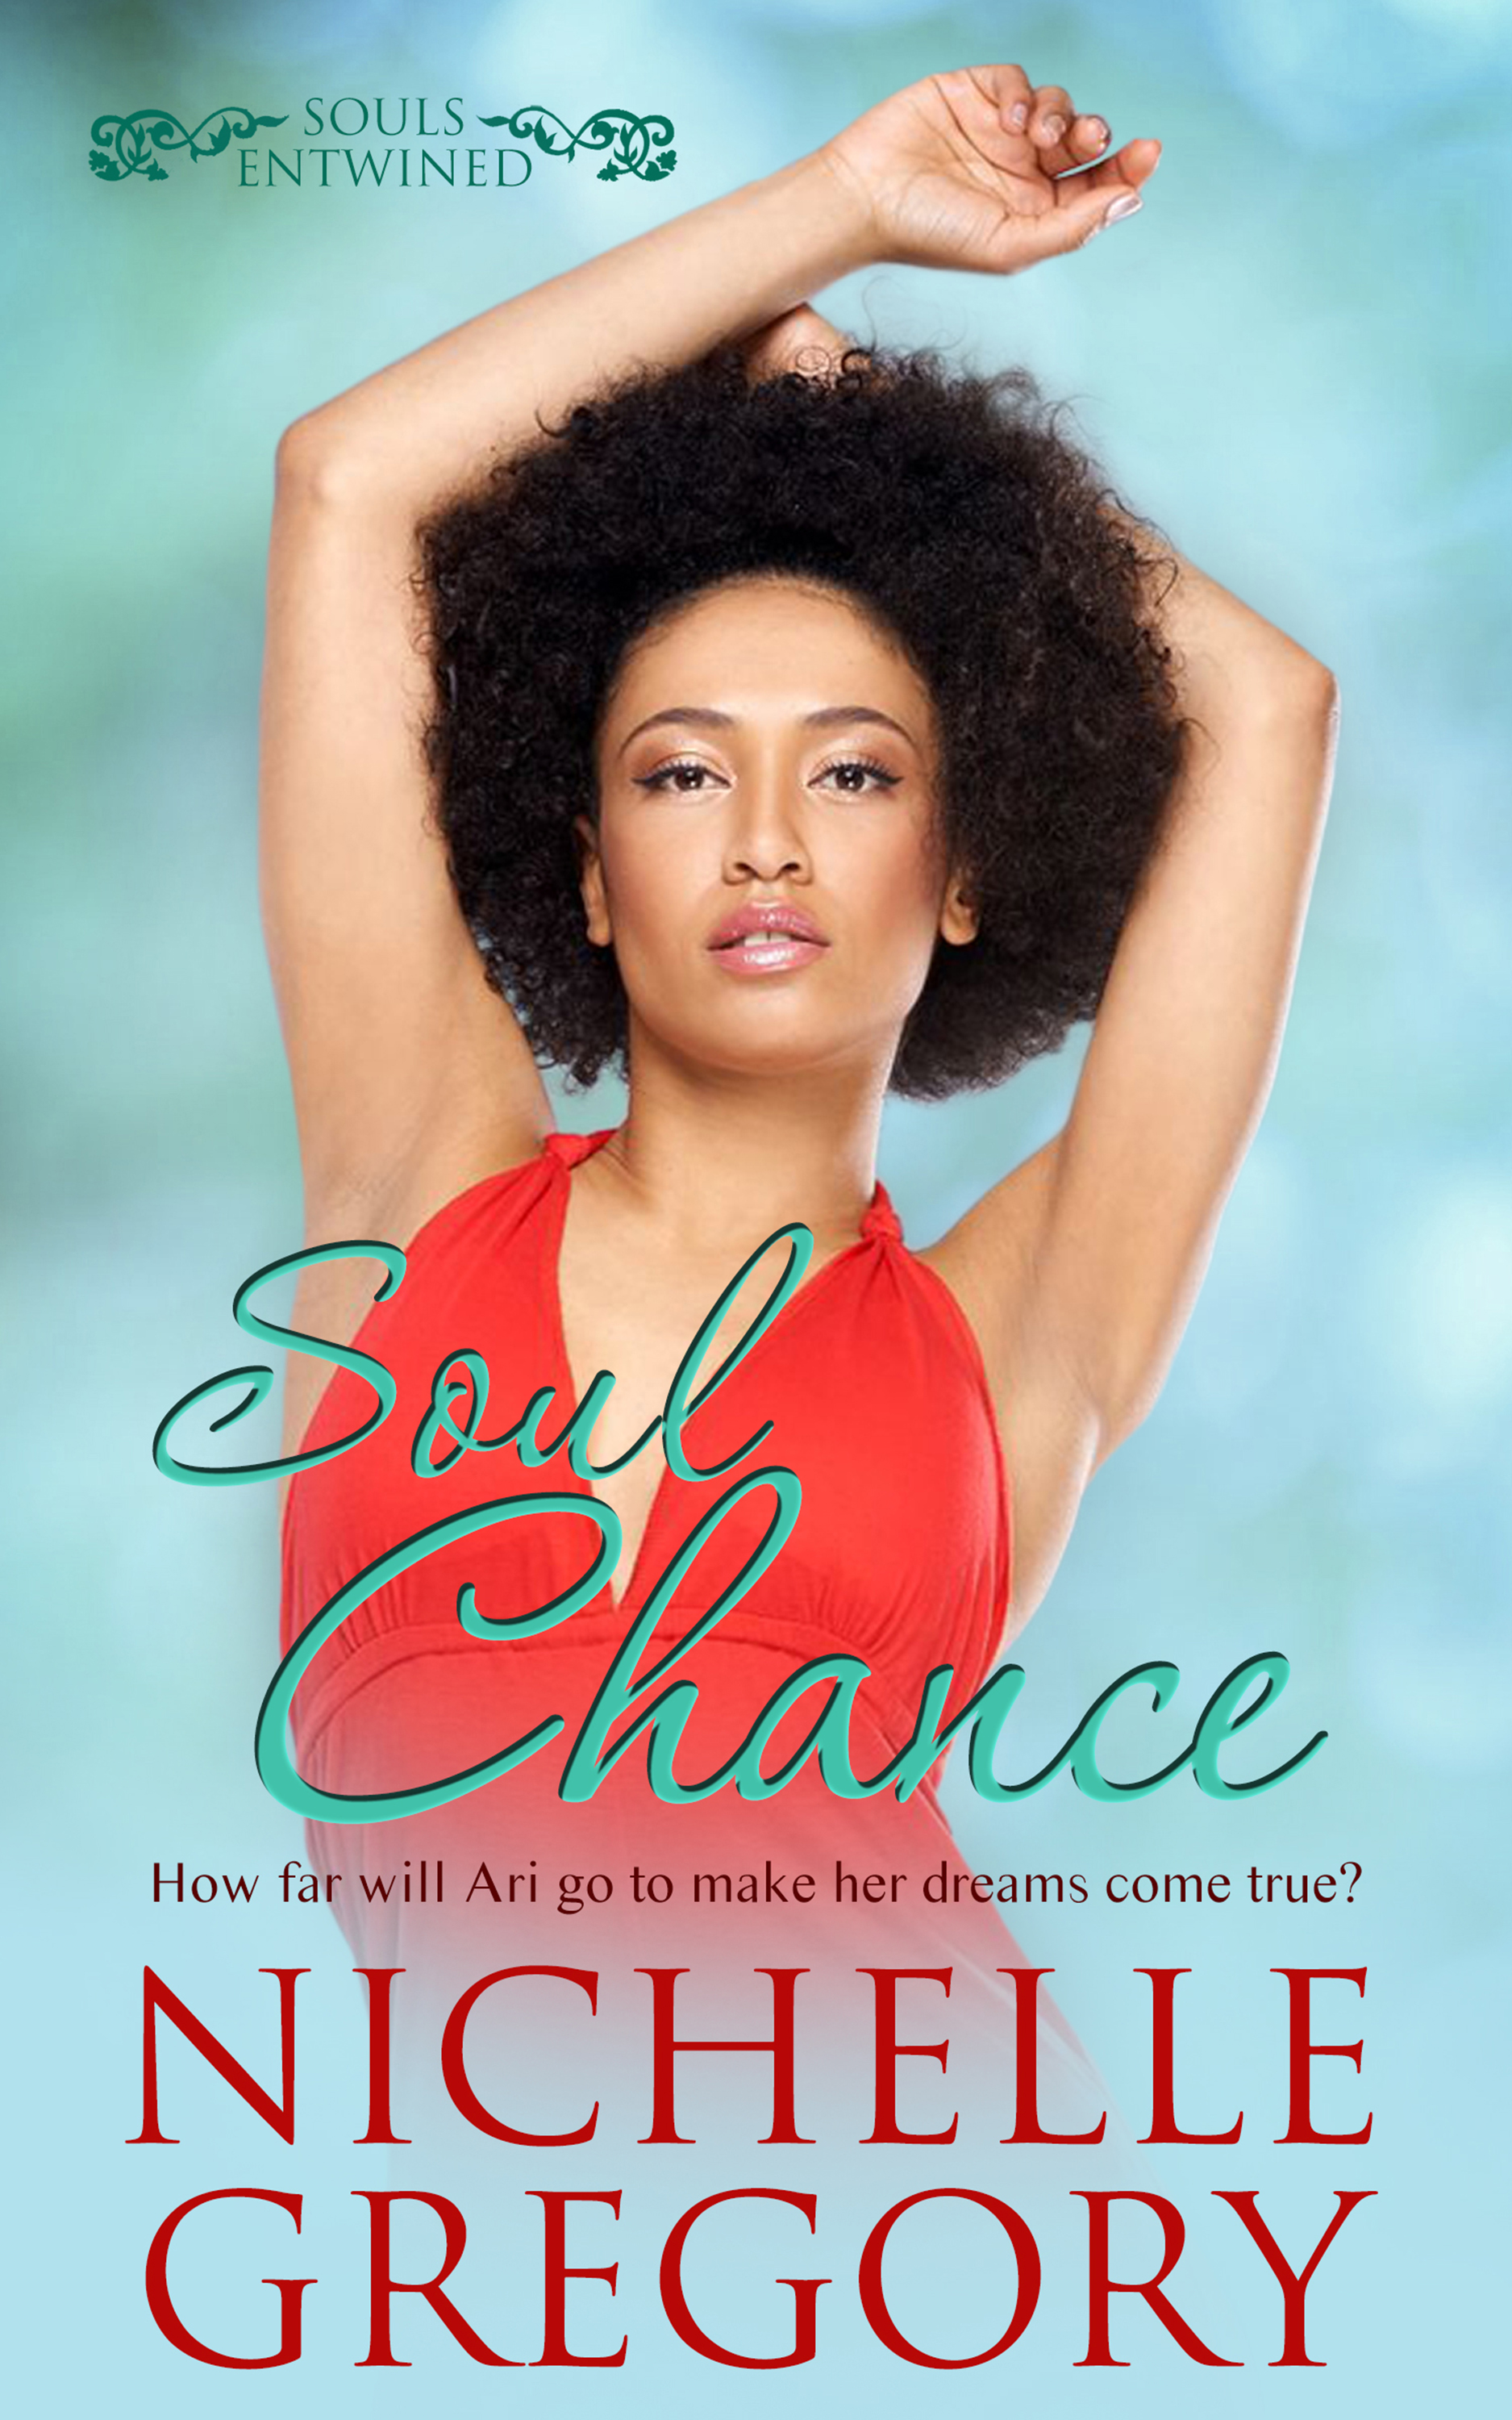 Soul Chance (2015) by Nichelle Gregory